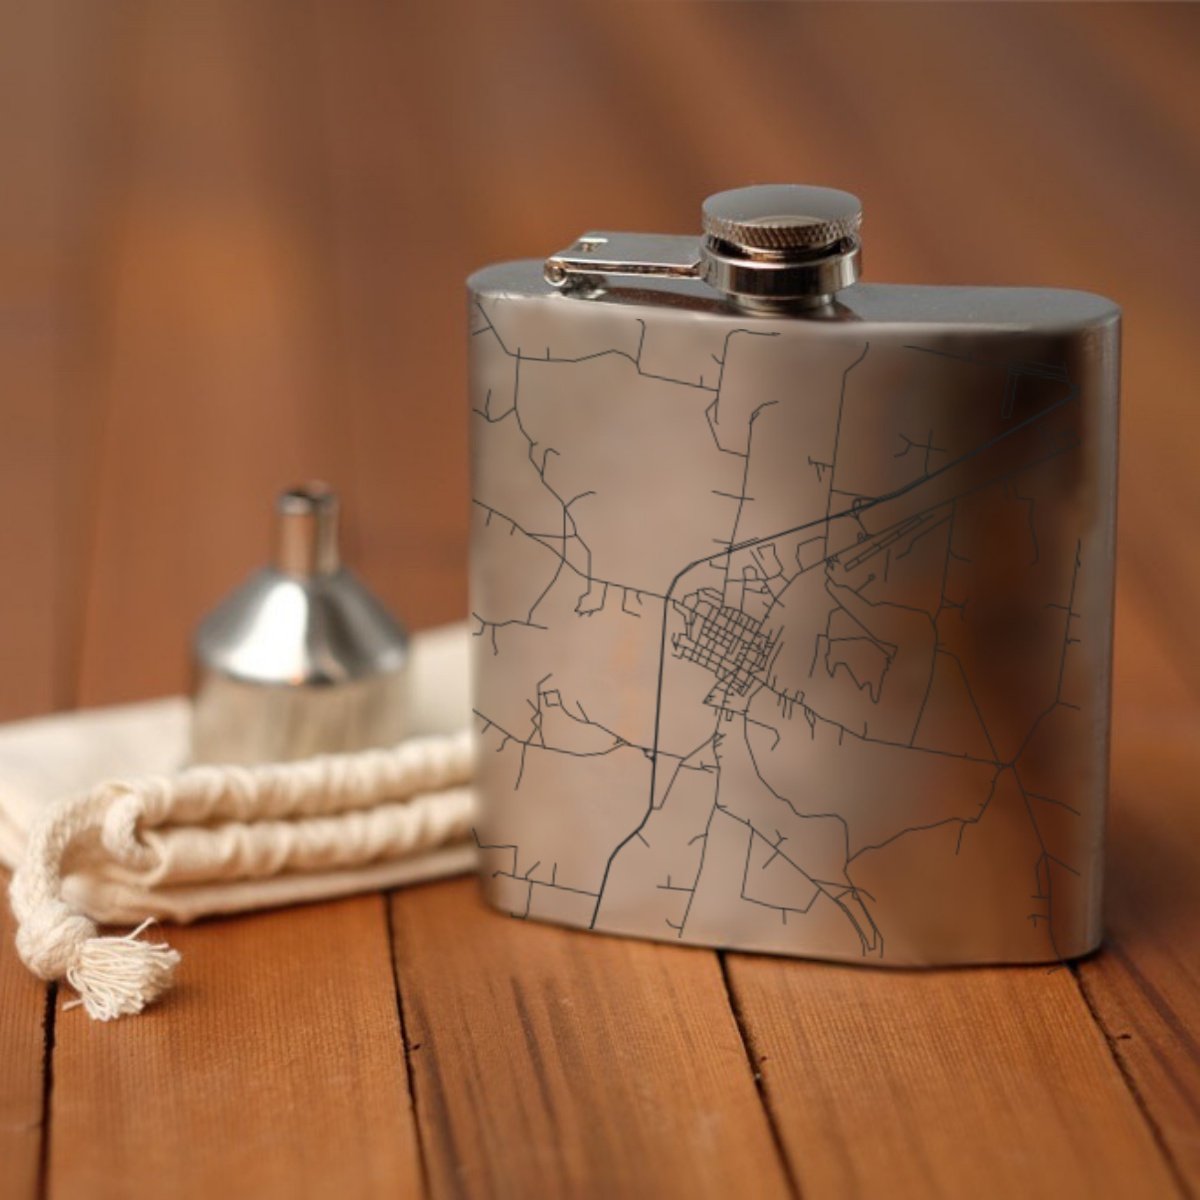 Mount Pleasant - Tennessee Engraved Map Hip Flask